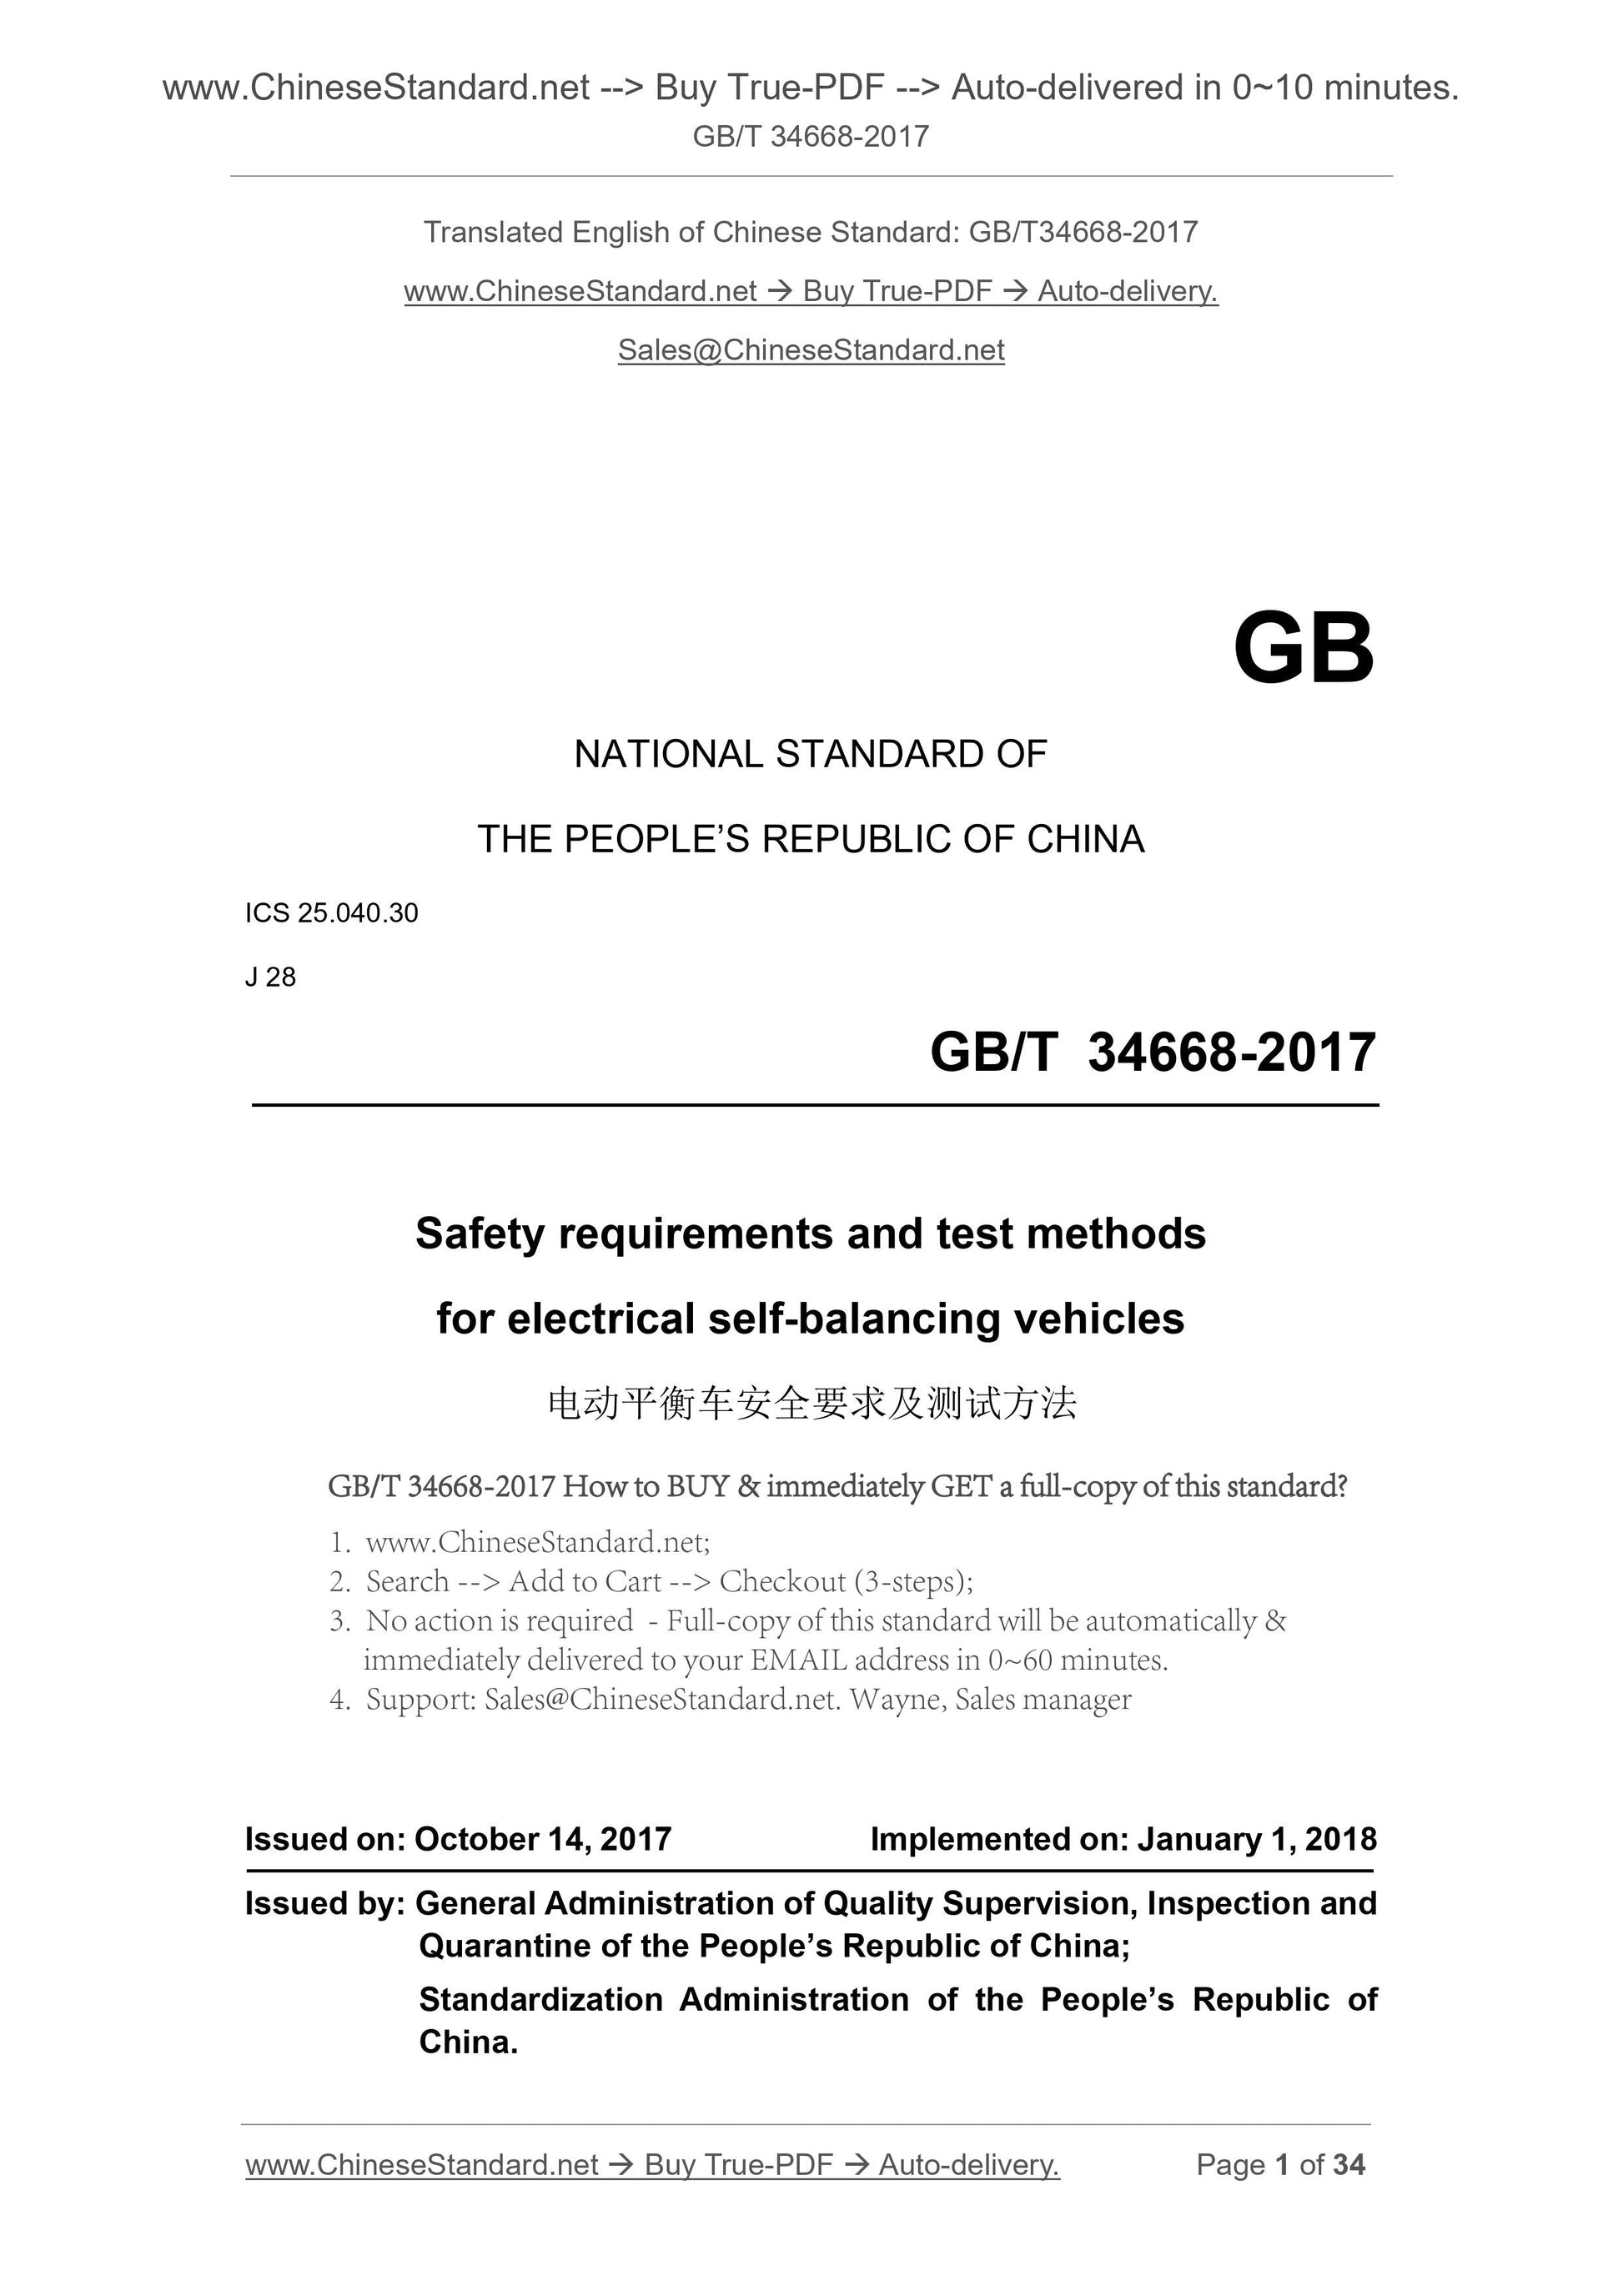 GB/T 34668-2017 Page 1